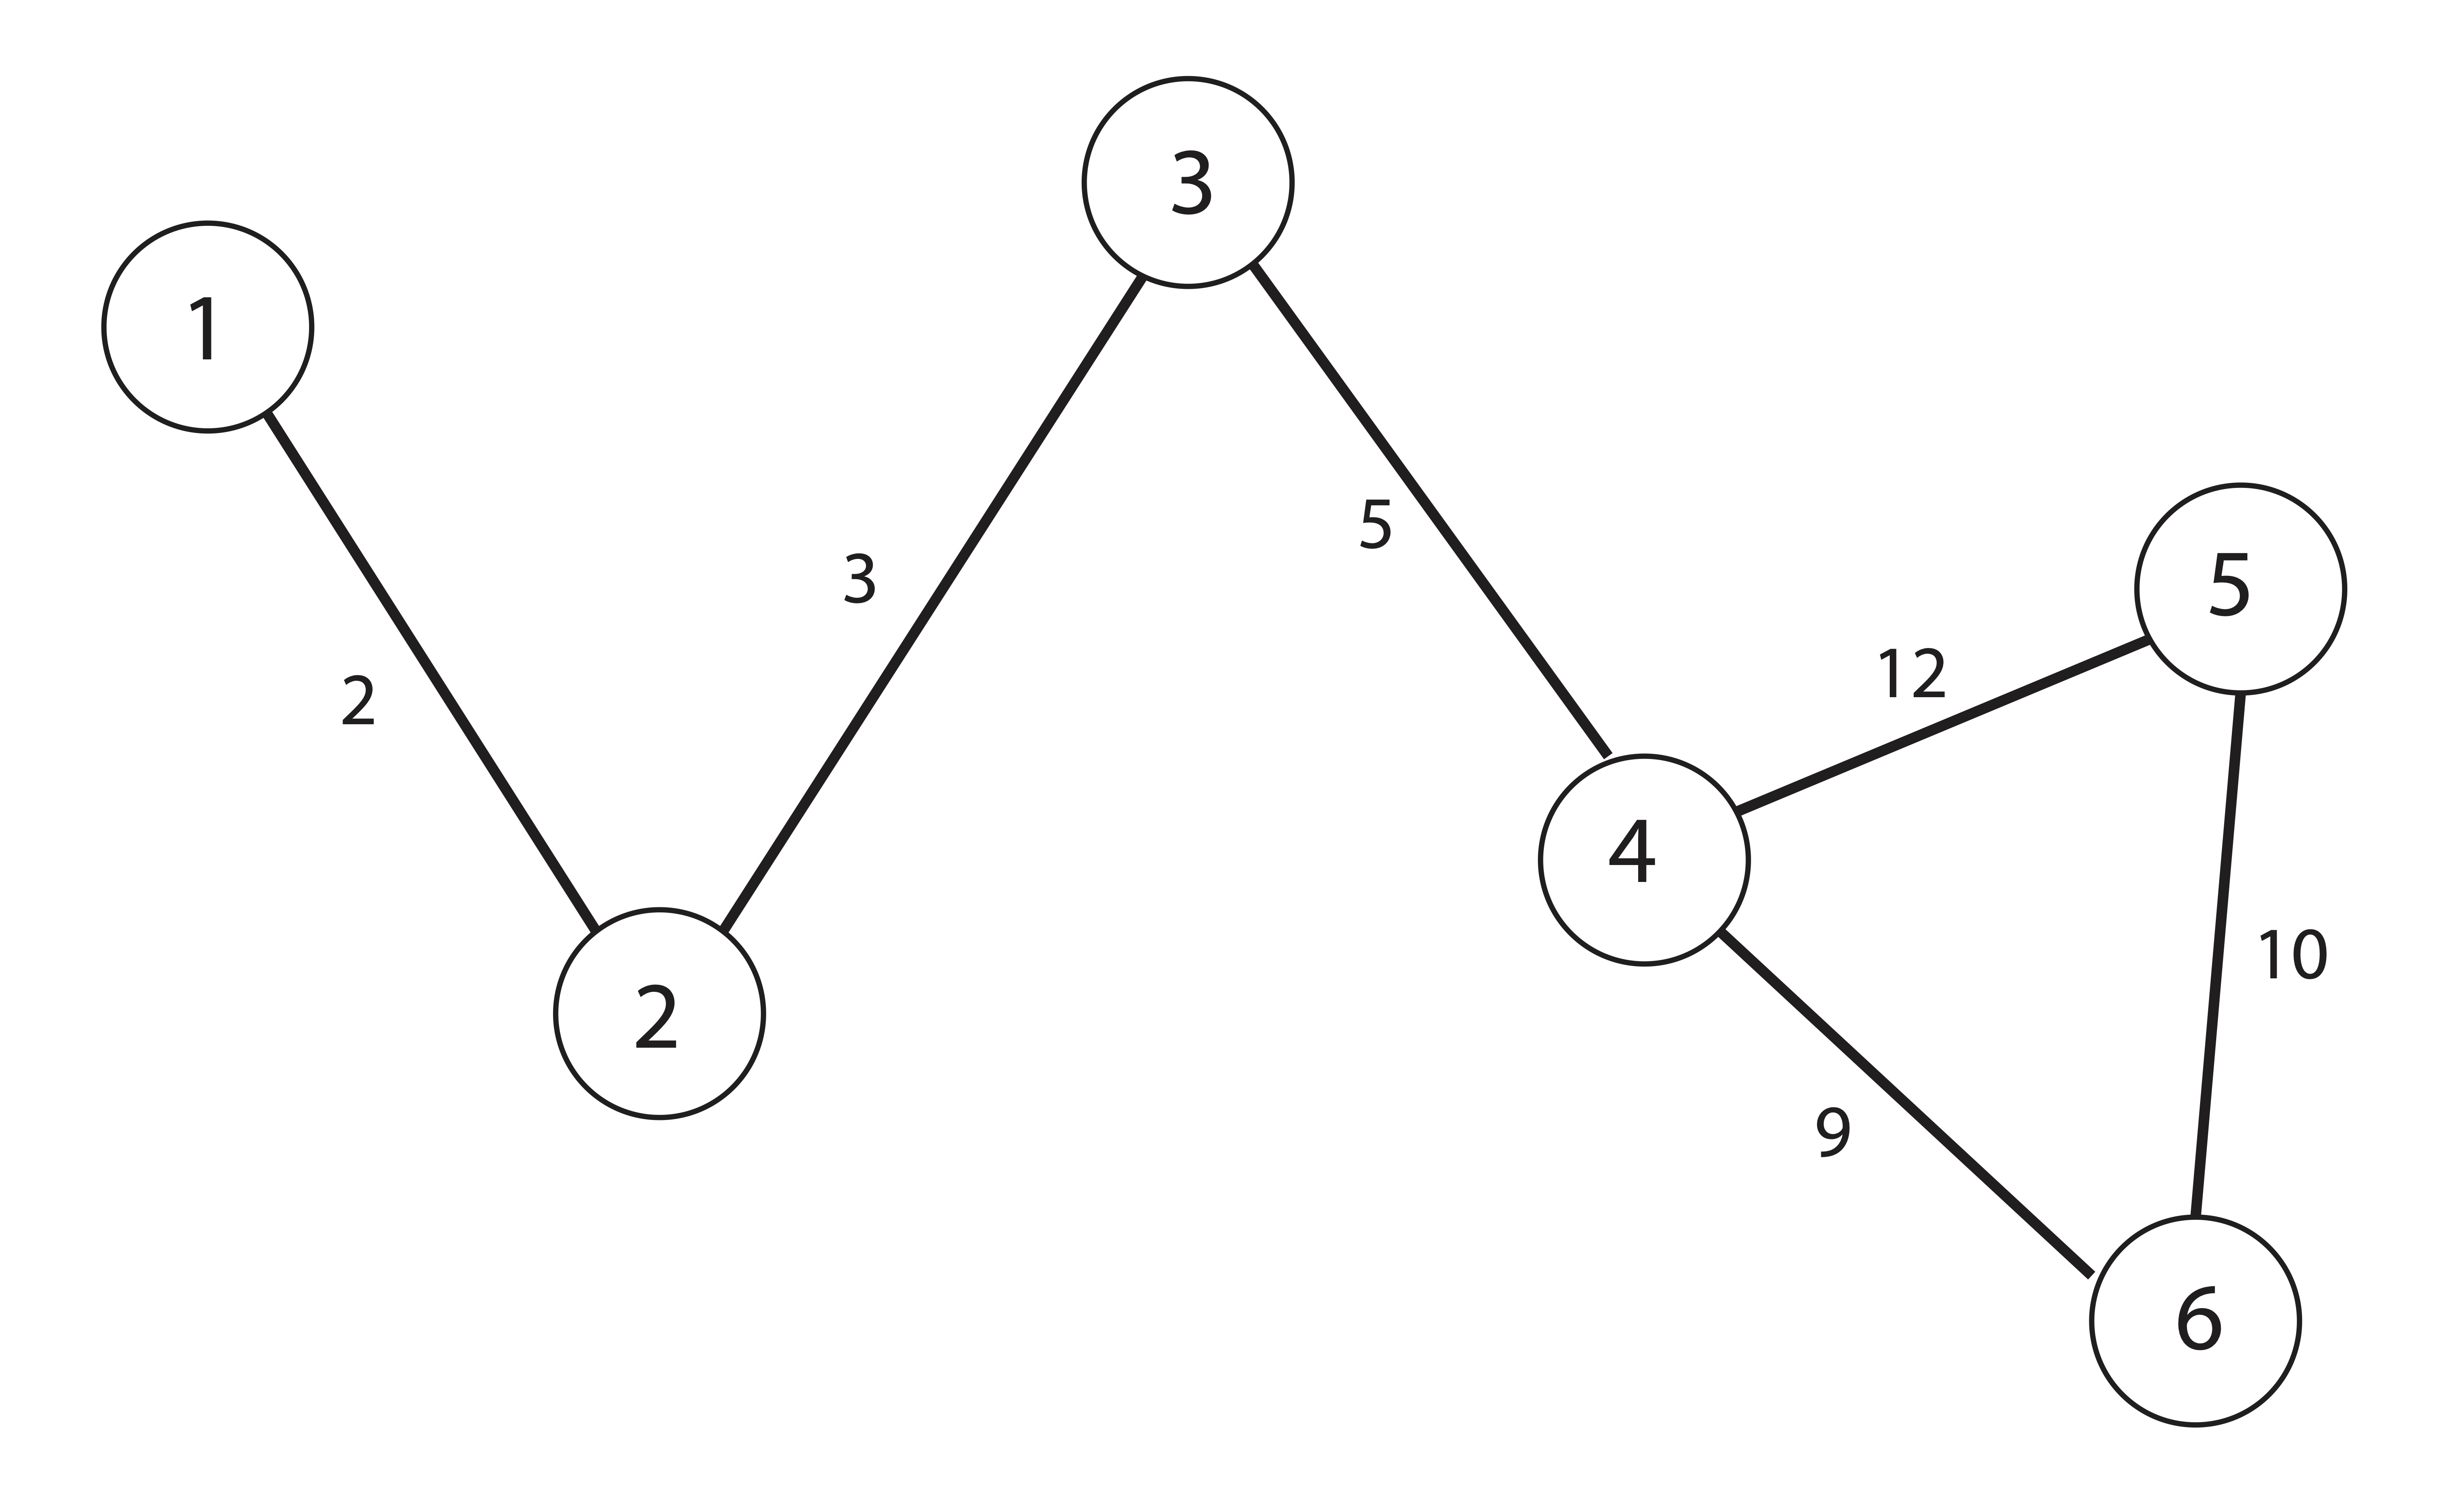 Graph (Network) for exercise 11